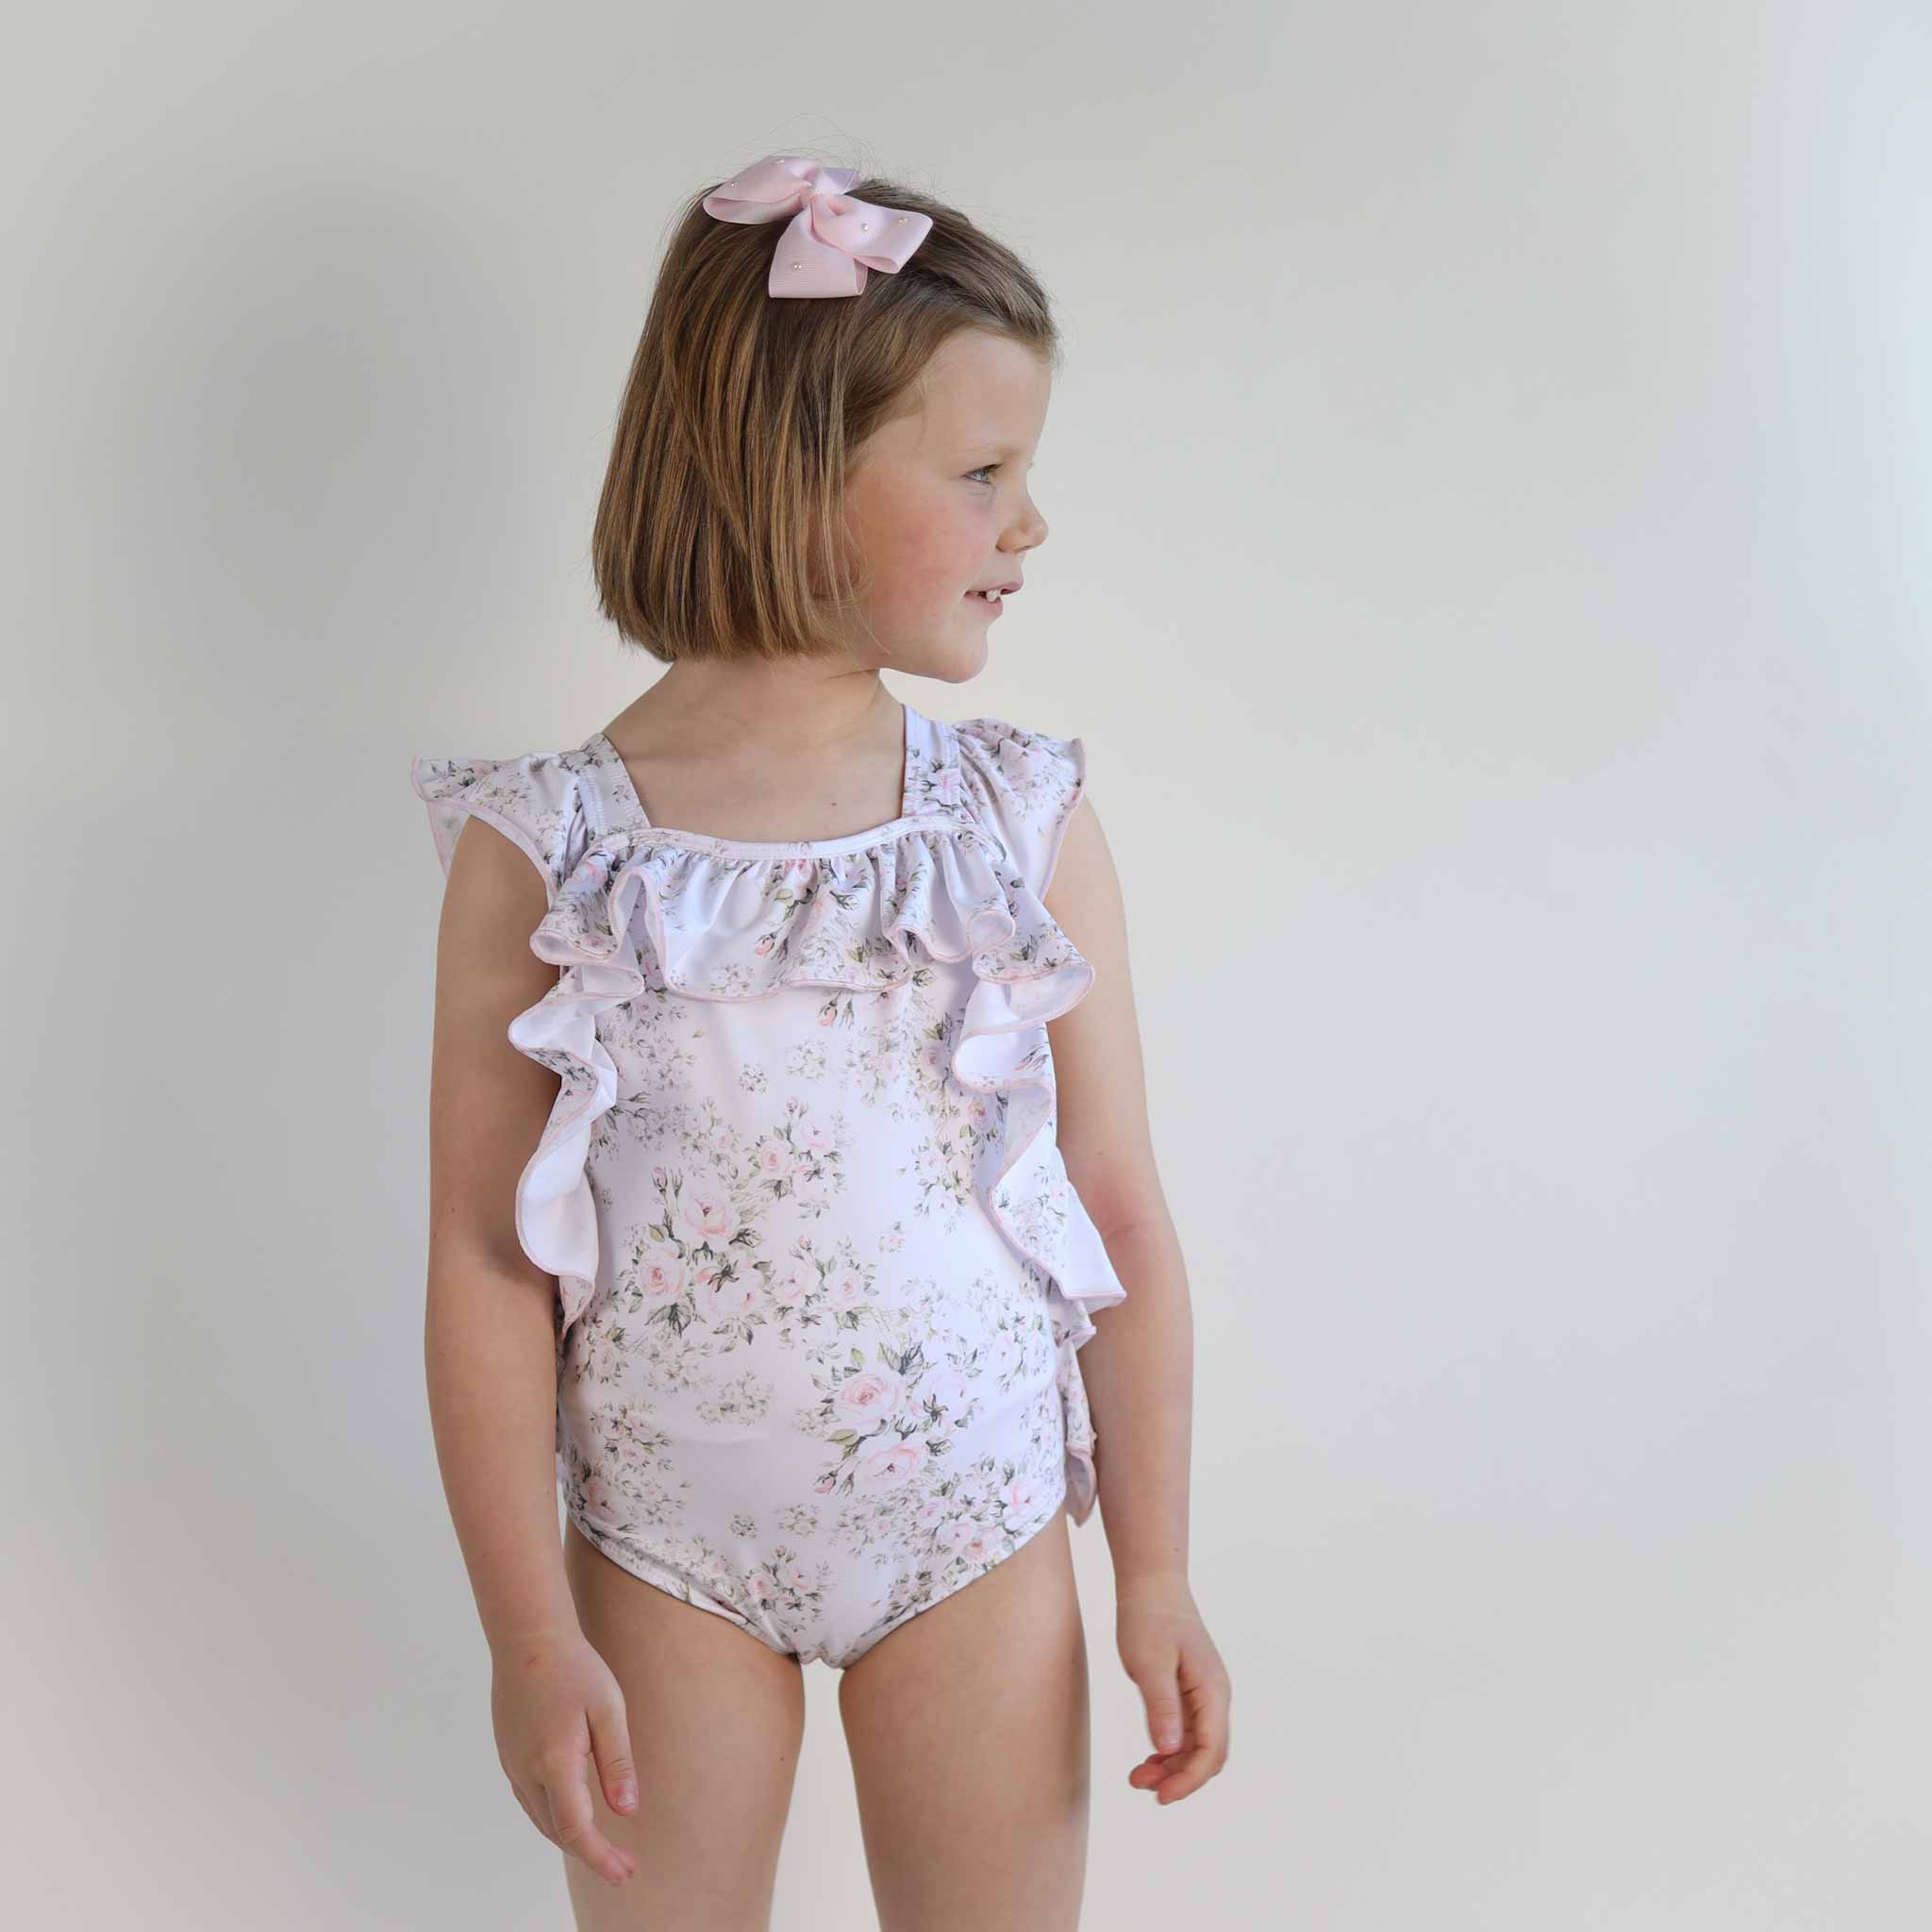 girl wearing white floral swimsuit